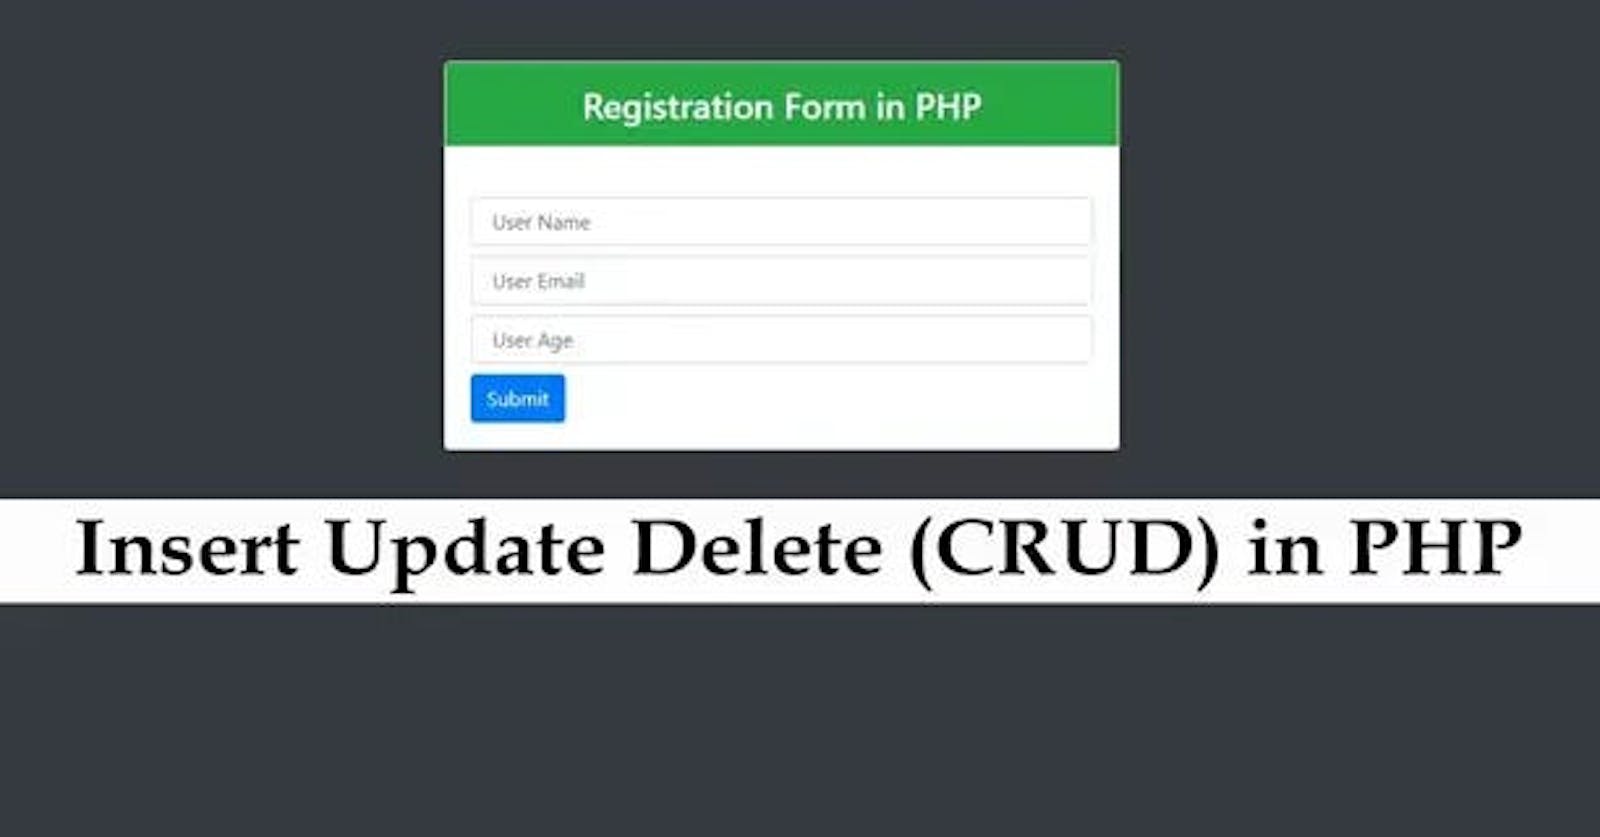 How to Insert Update Delete View in PHP